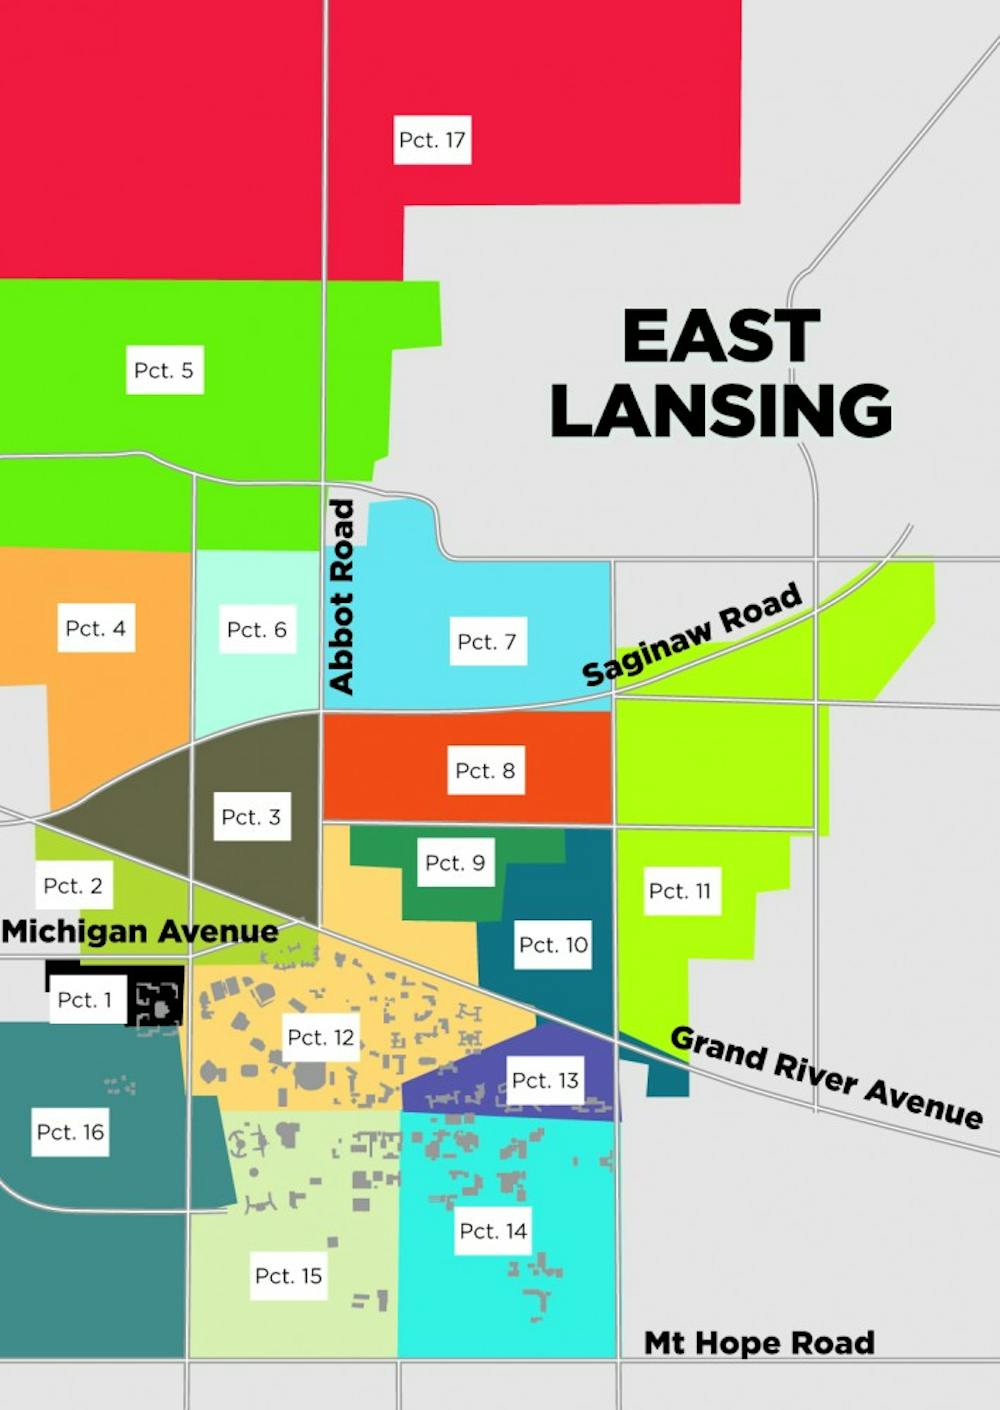 	<p>Source:  <a href="http://www.cityofeastlansing.com/Home/Departments/CityClerk/ElectionInformation/PollingLocations/">City of East Lansing</a></p>